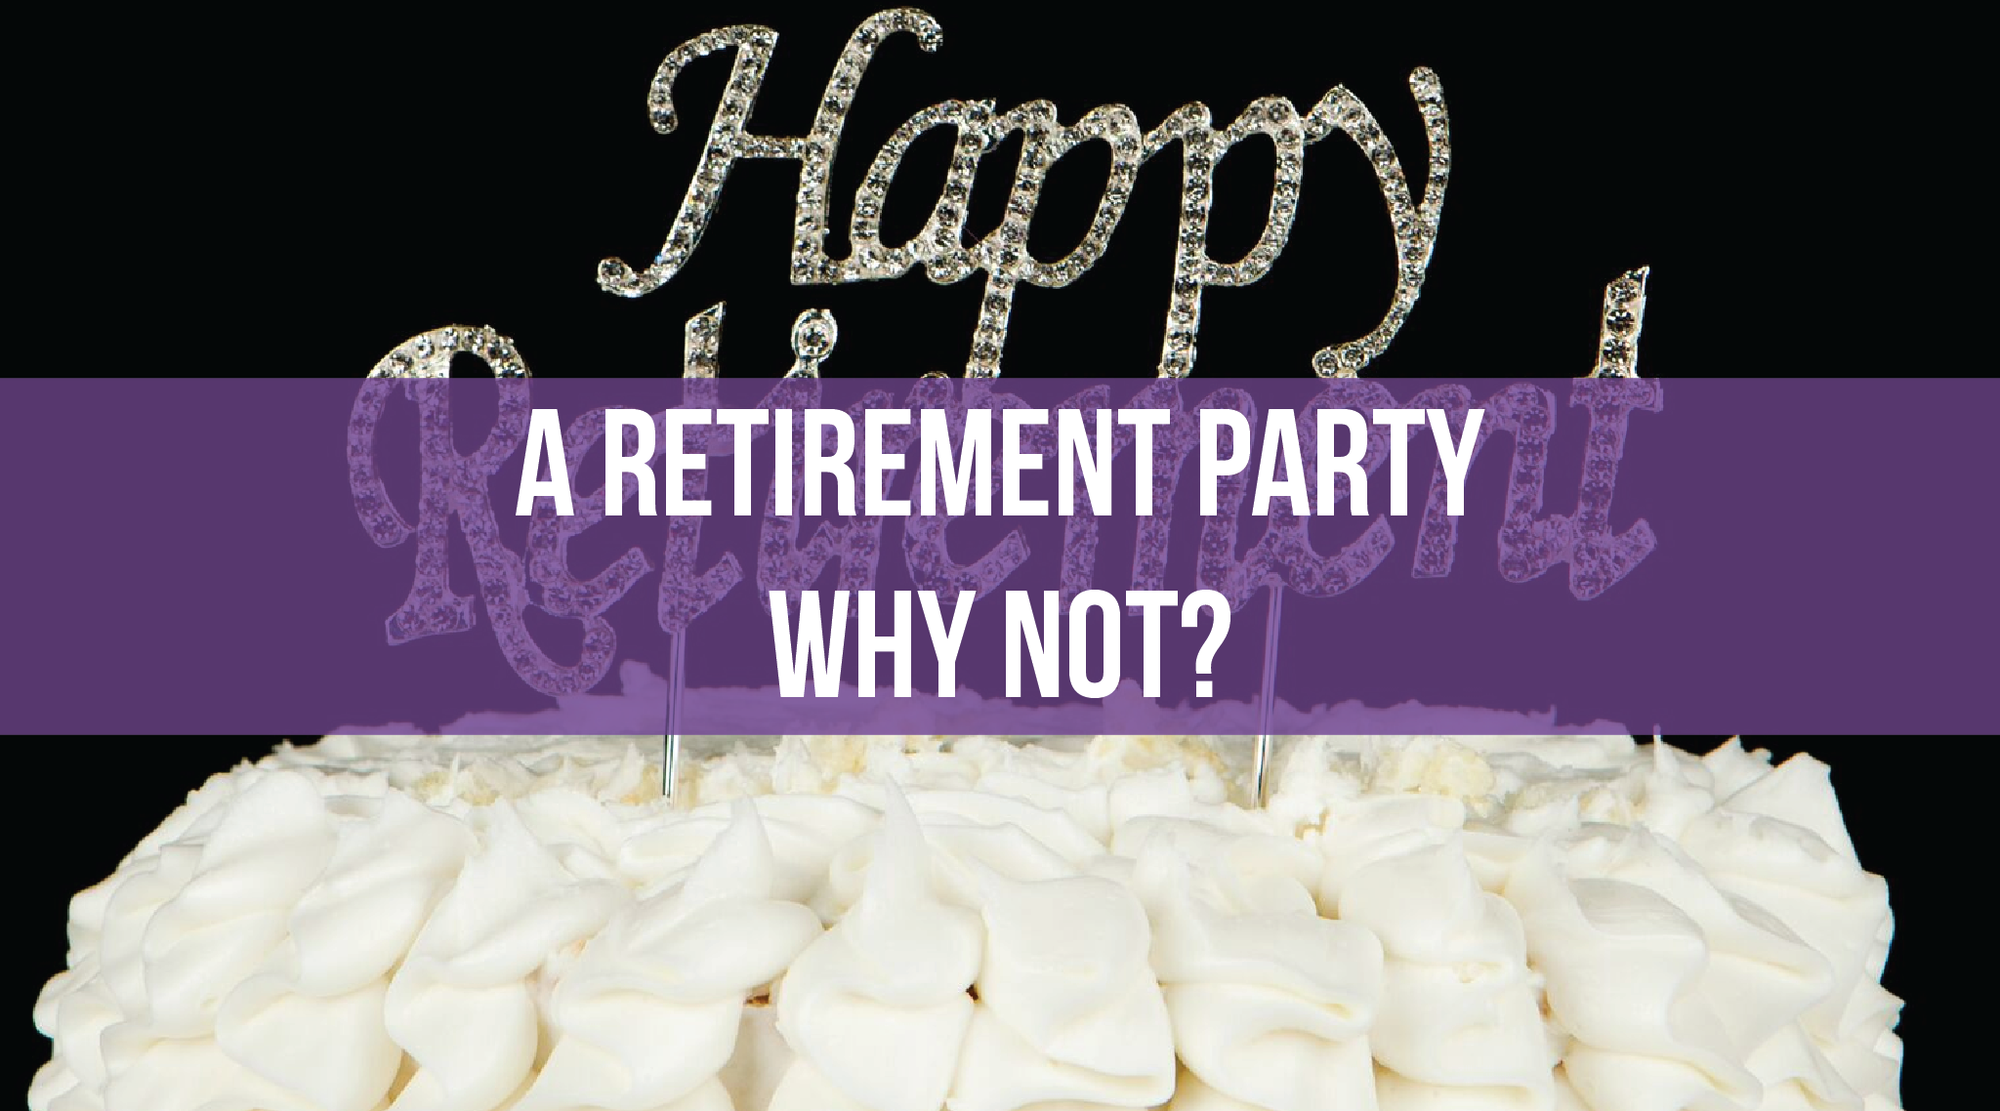 A Retirement Party - Why Not?